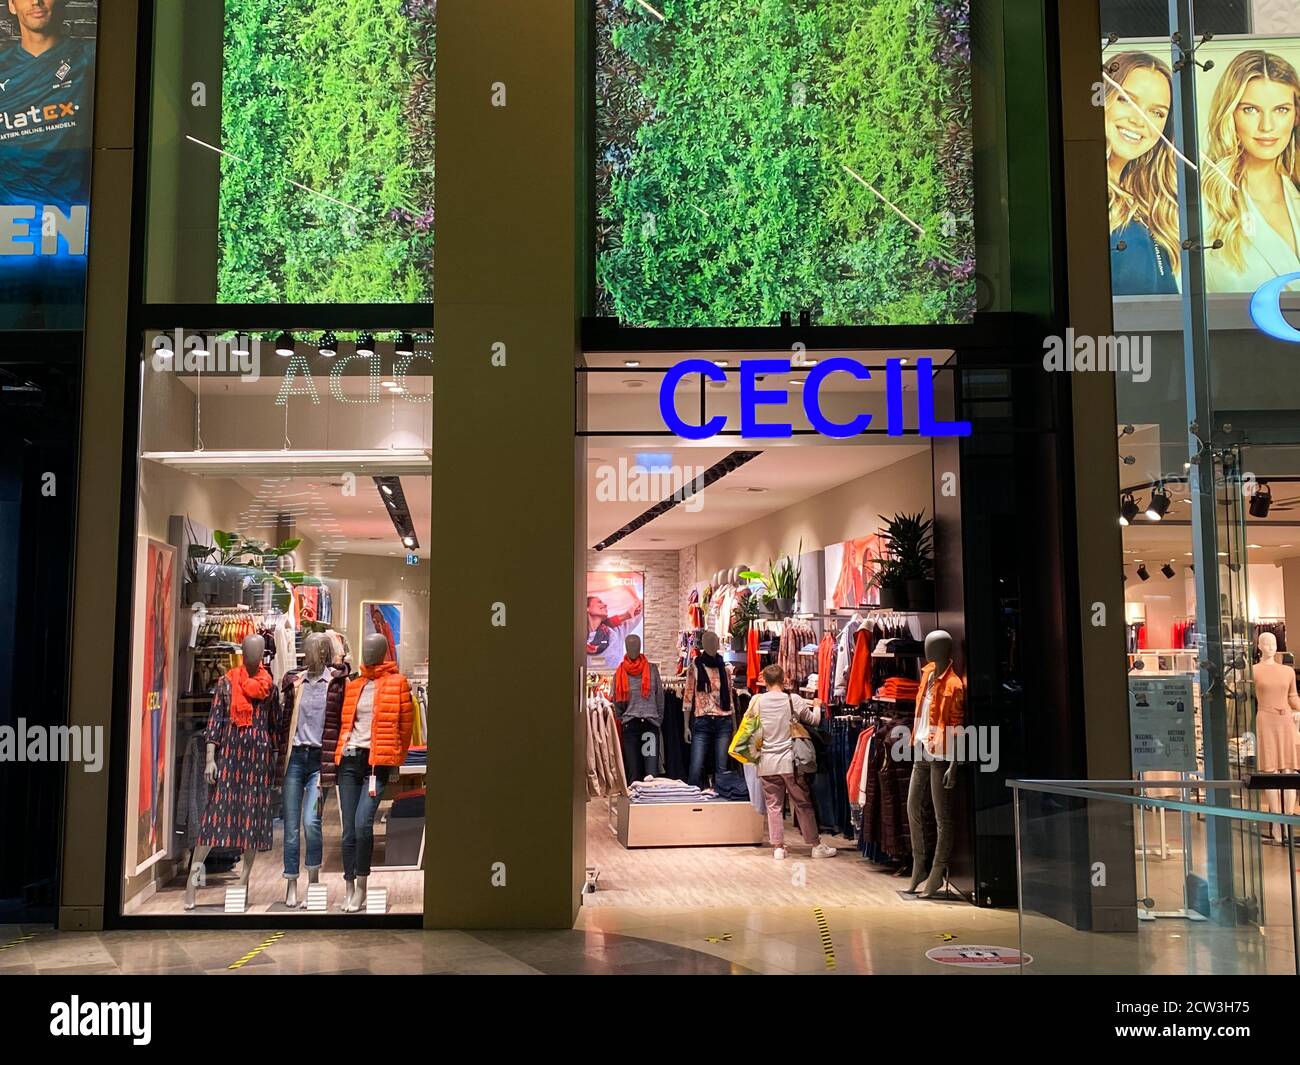 Monchengladbach, Germany - September 9. 2020: View on Cecil fashion company  store front inside Minto shopping mall Stock Photo - Alamy